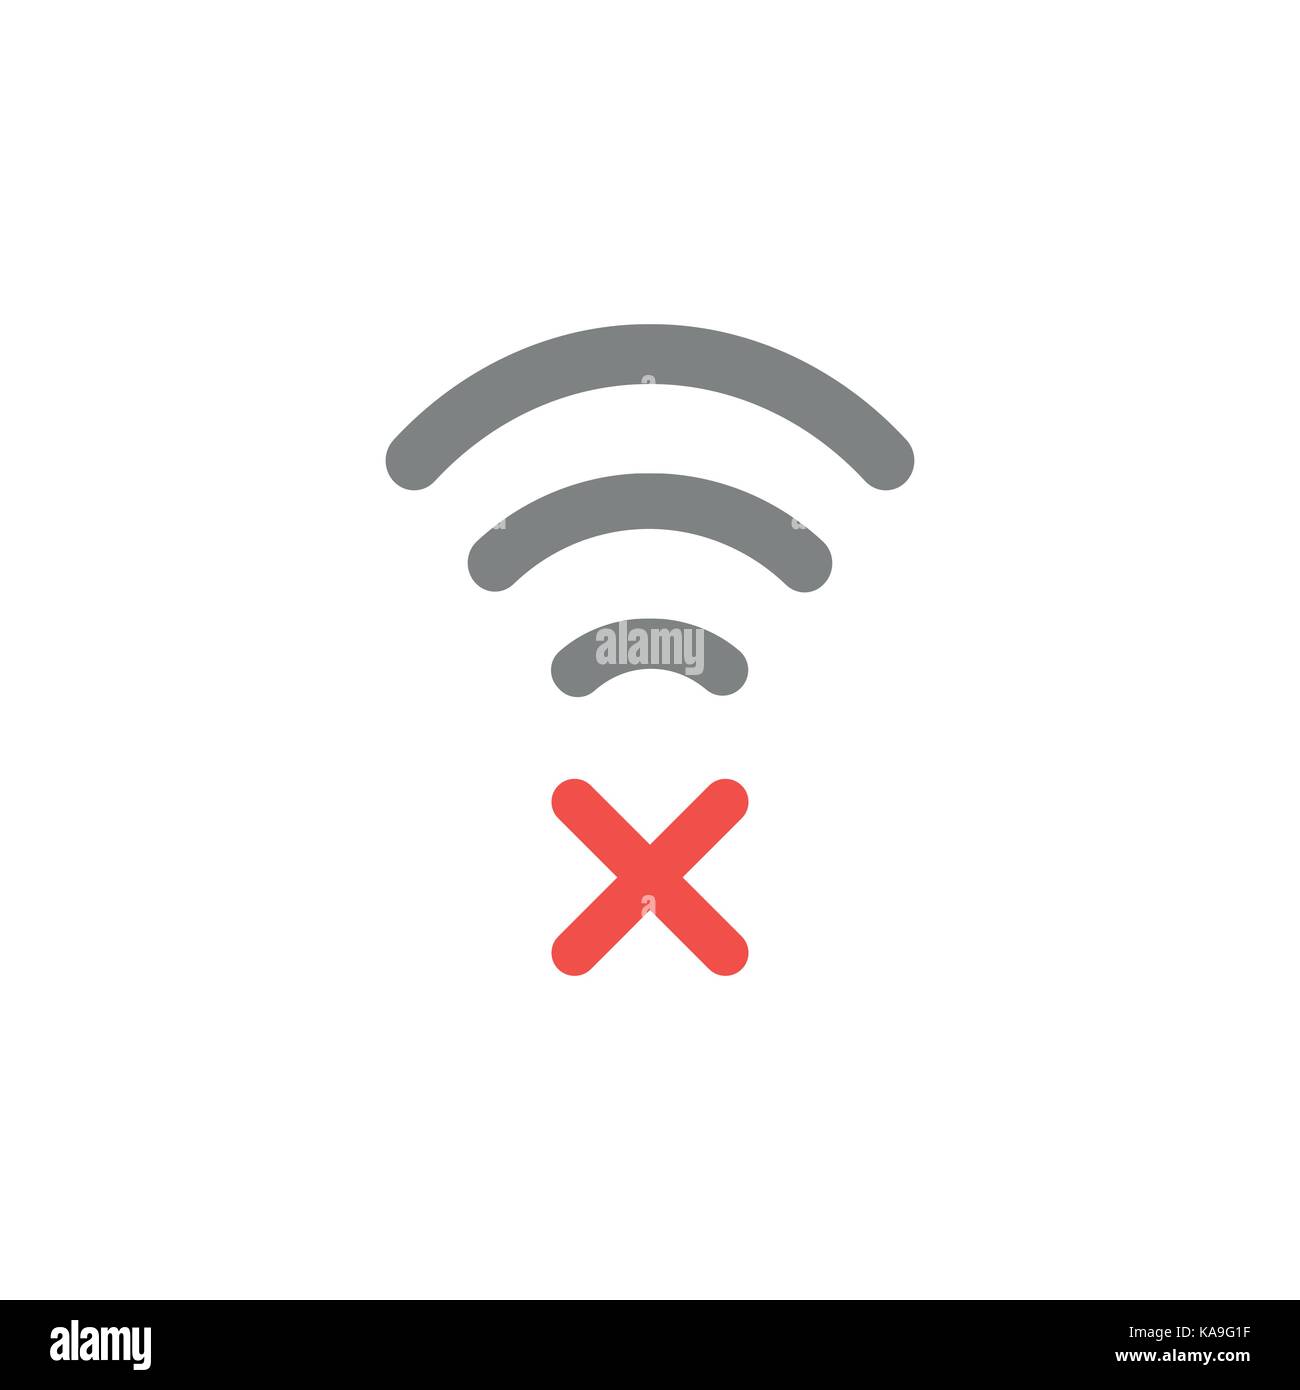 Flat Design Style Vector Illustration Concept Of Grey Wifi Symbol Icon With Red X Mark On White Background Stock Vector Image Art Alamy